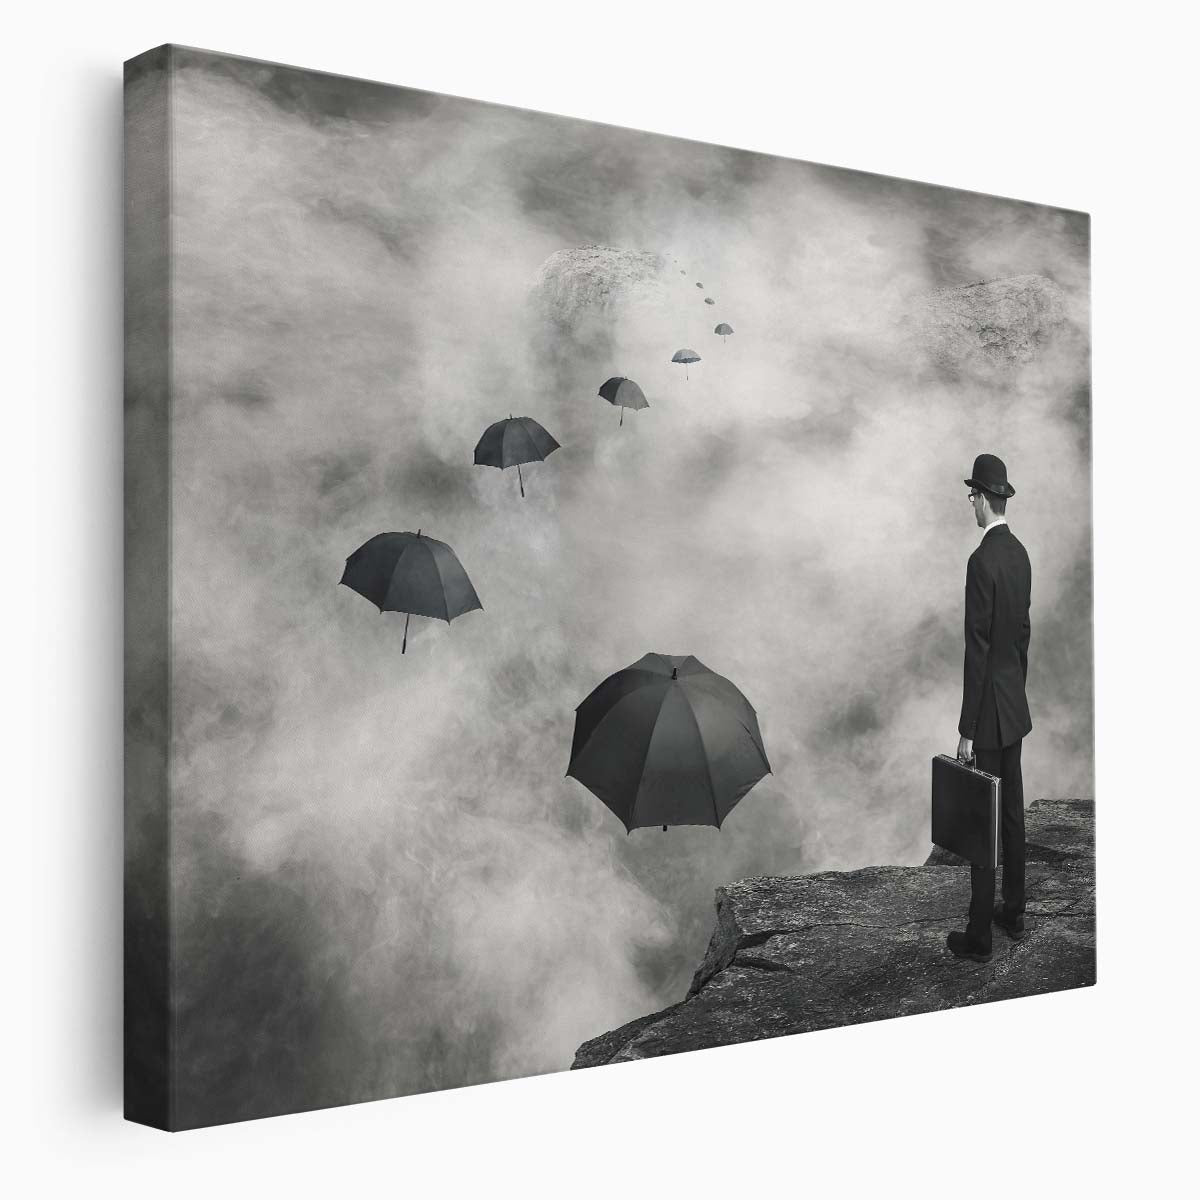 Surreal Businessman's Cliffside Decision Wall Art by Luxuriance Designs. Made in USA.